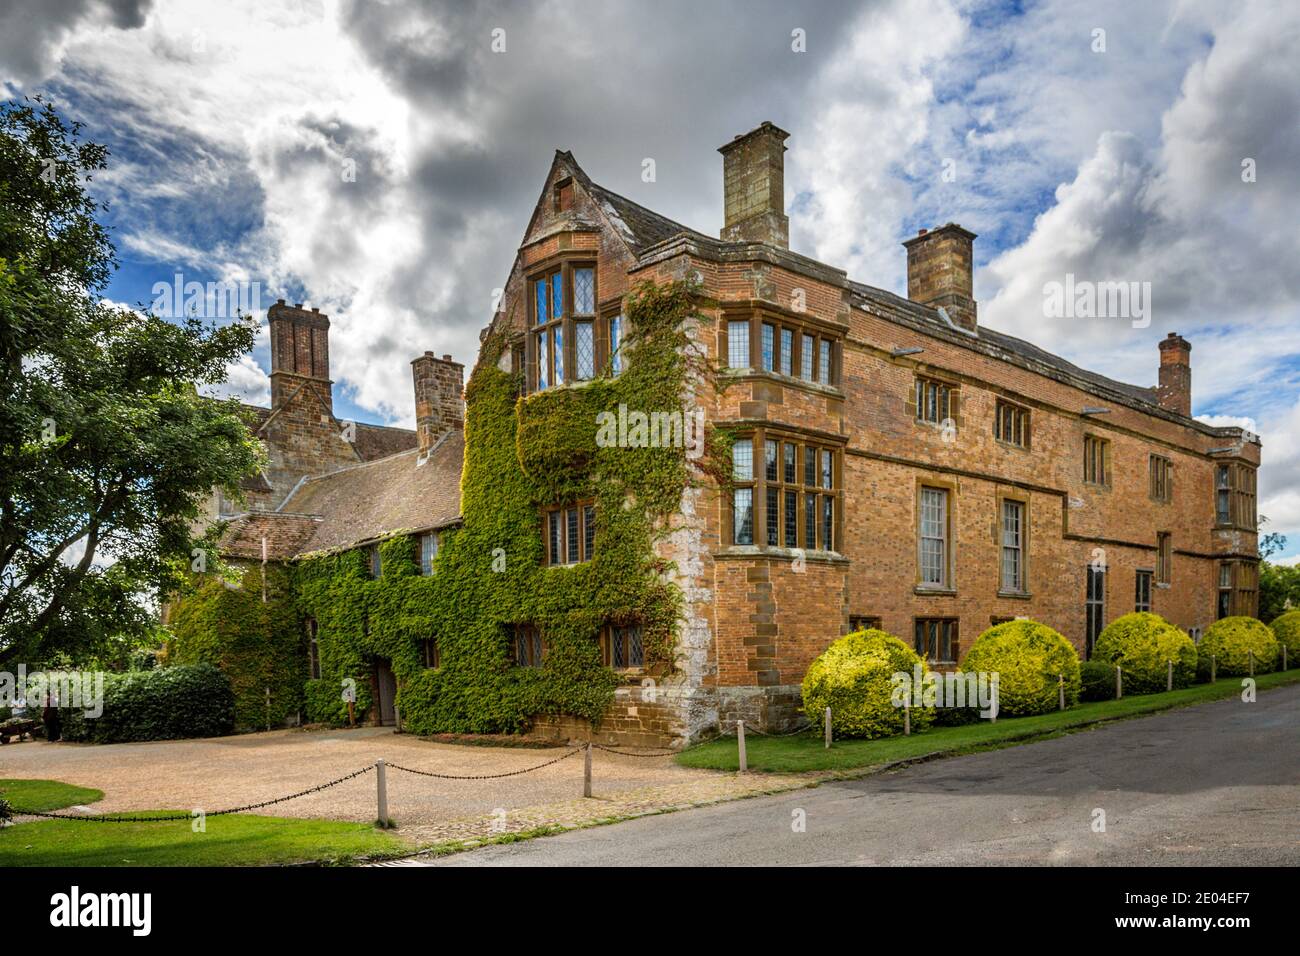 Canons Ashby House is an Elizabethan manor house located in Canons Ashby, Northamptonshire, England. Stock Photo